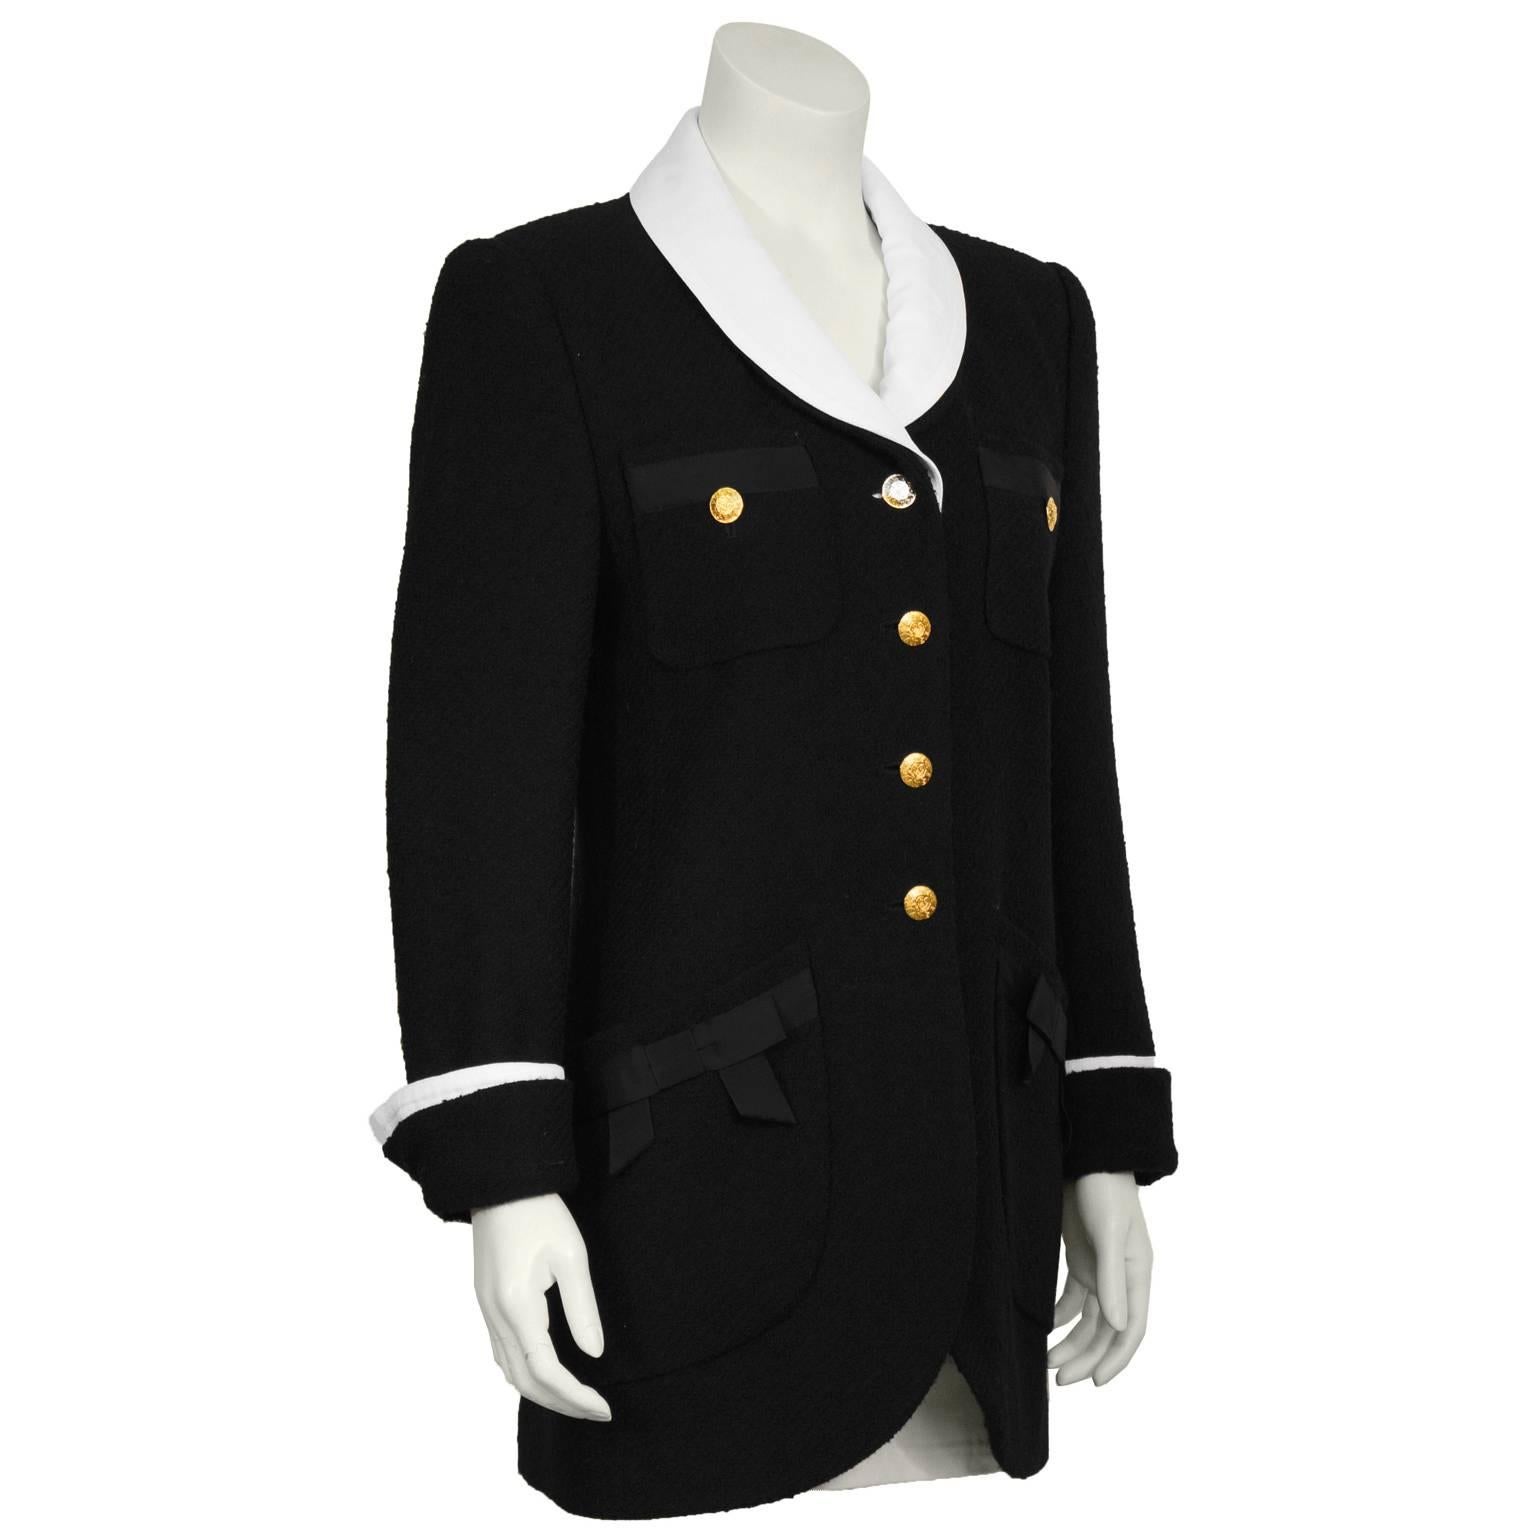 Rena Lange black boucle Chanel style blazer from the late 1980's. The jacket has a white cotton pique removable lapel and cuff detail and is adorned with logo gold buttons down the front and on the cuffs. The breast pockets feature two buttons with